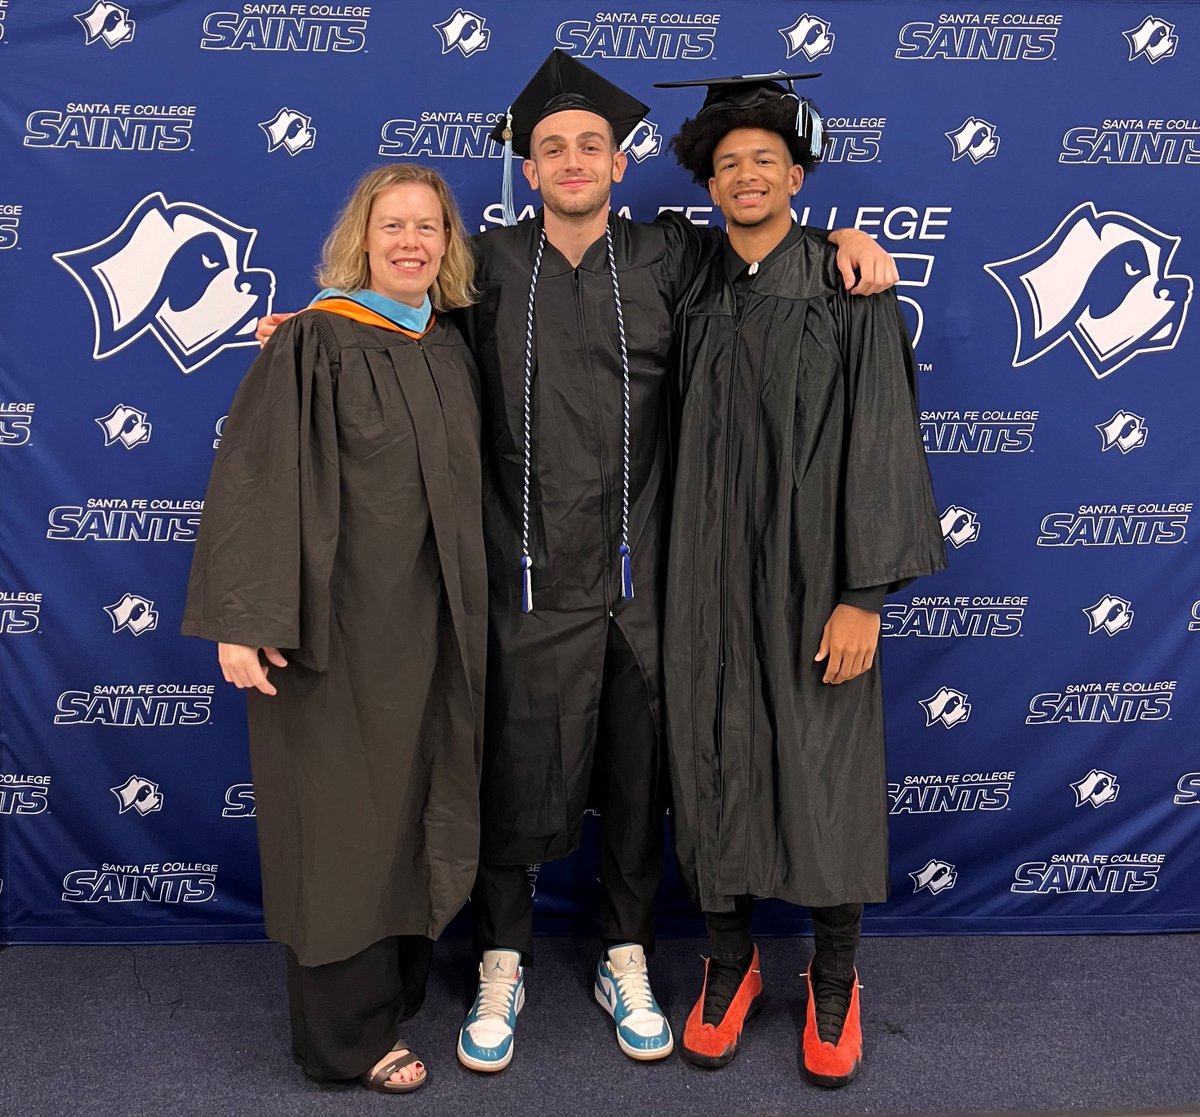 Congratulations to the Class of 2023, and to these two Saints who stopped for a picture with Athletic Director Chanda Stebbins. Best wishes for your next steps Niko and Nas!